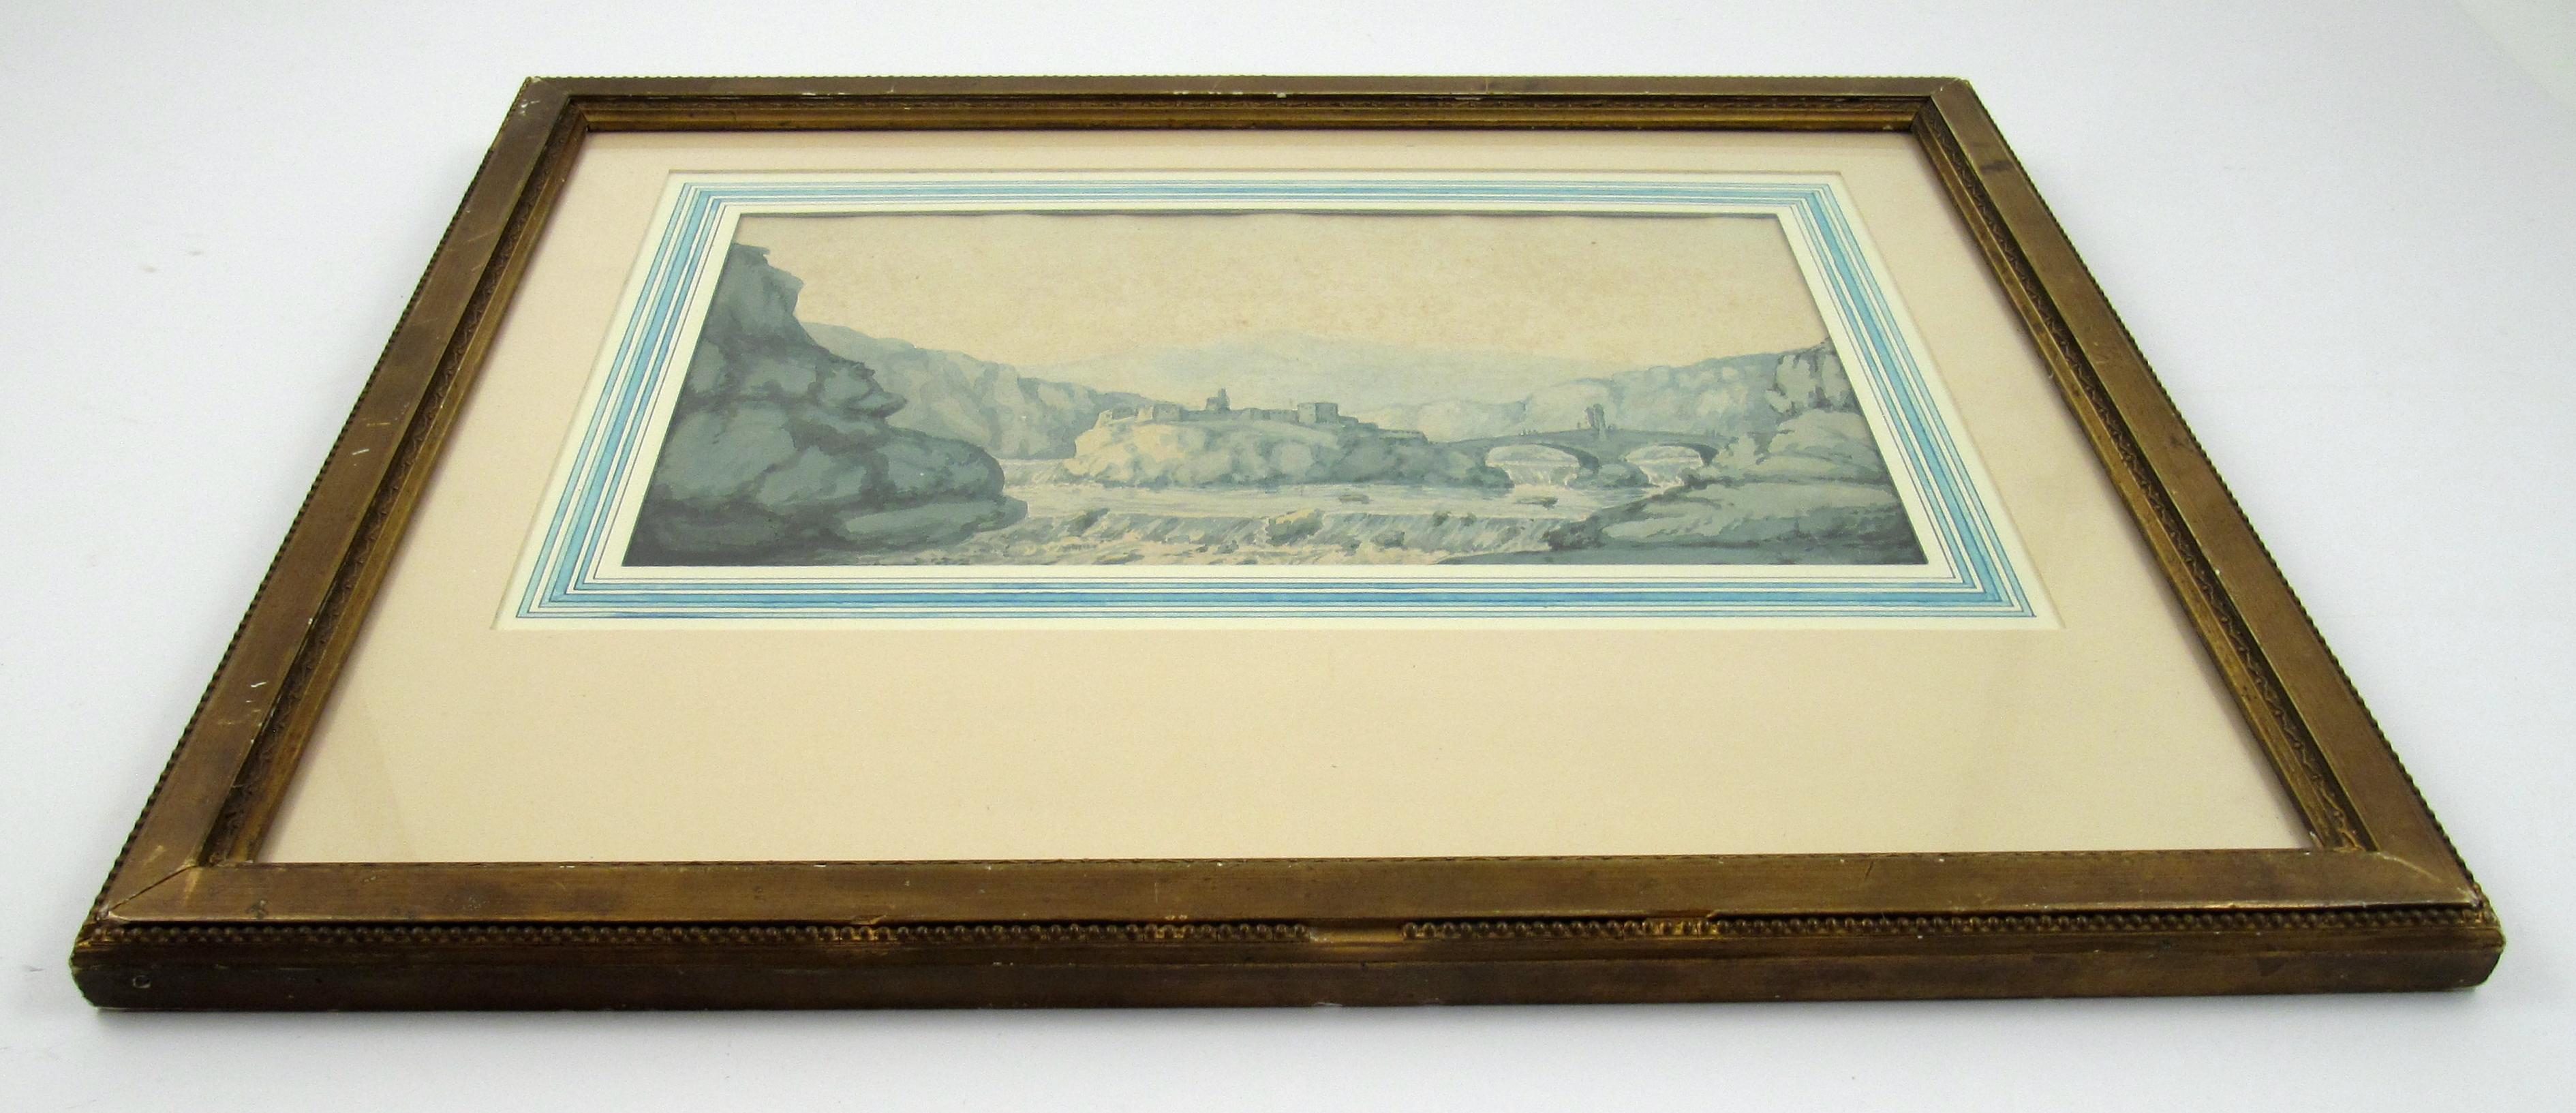 William Daniell (British, 1769-1837) Fortification 19th Century Ink Wash Drawing For Sale 4